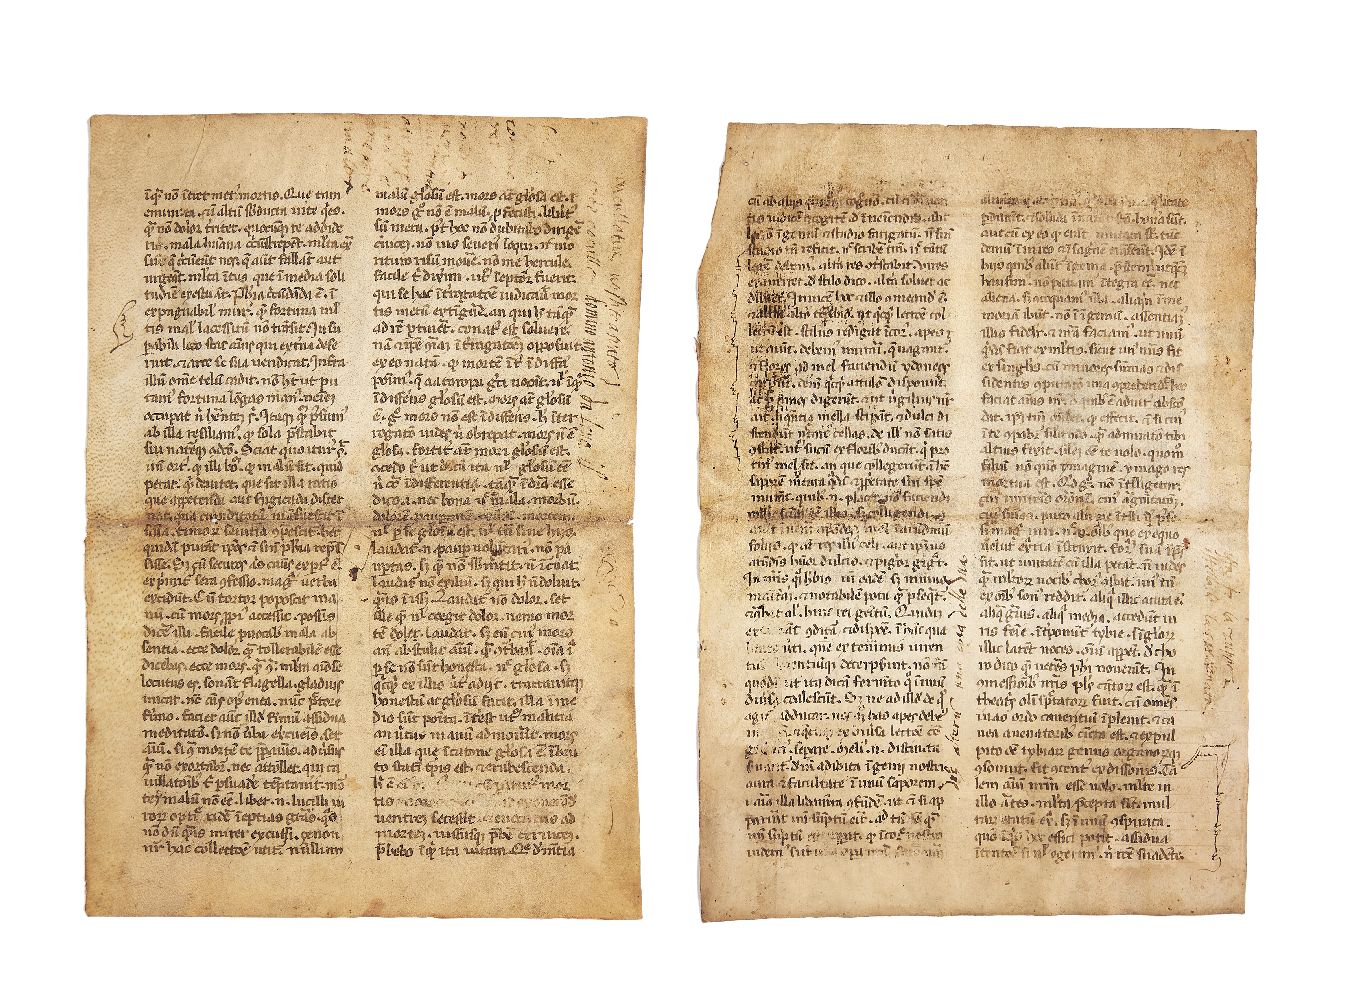 Two leaves from a copy of Seneca the younger, Epistulae Morales ad Lucilium, in Latin